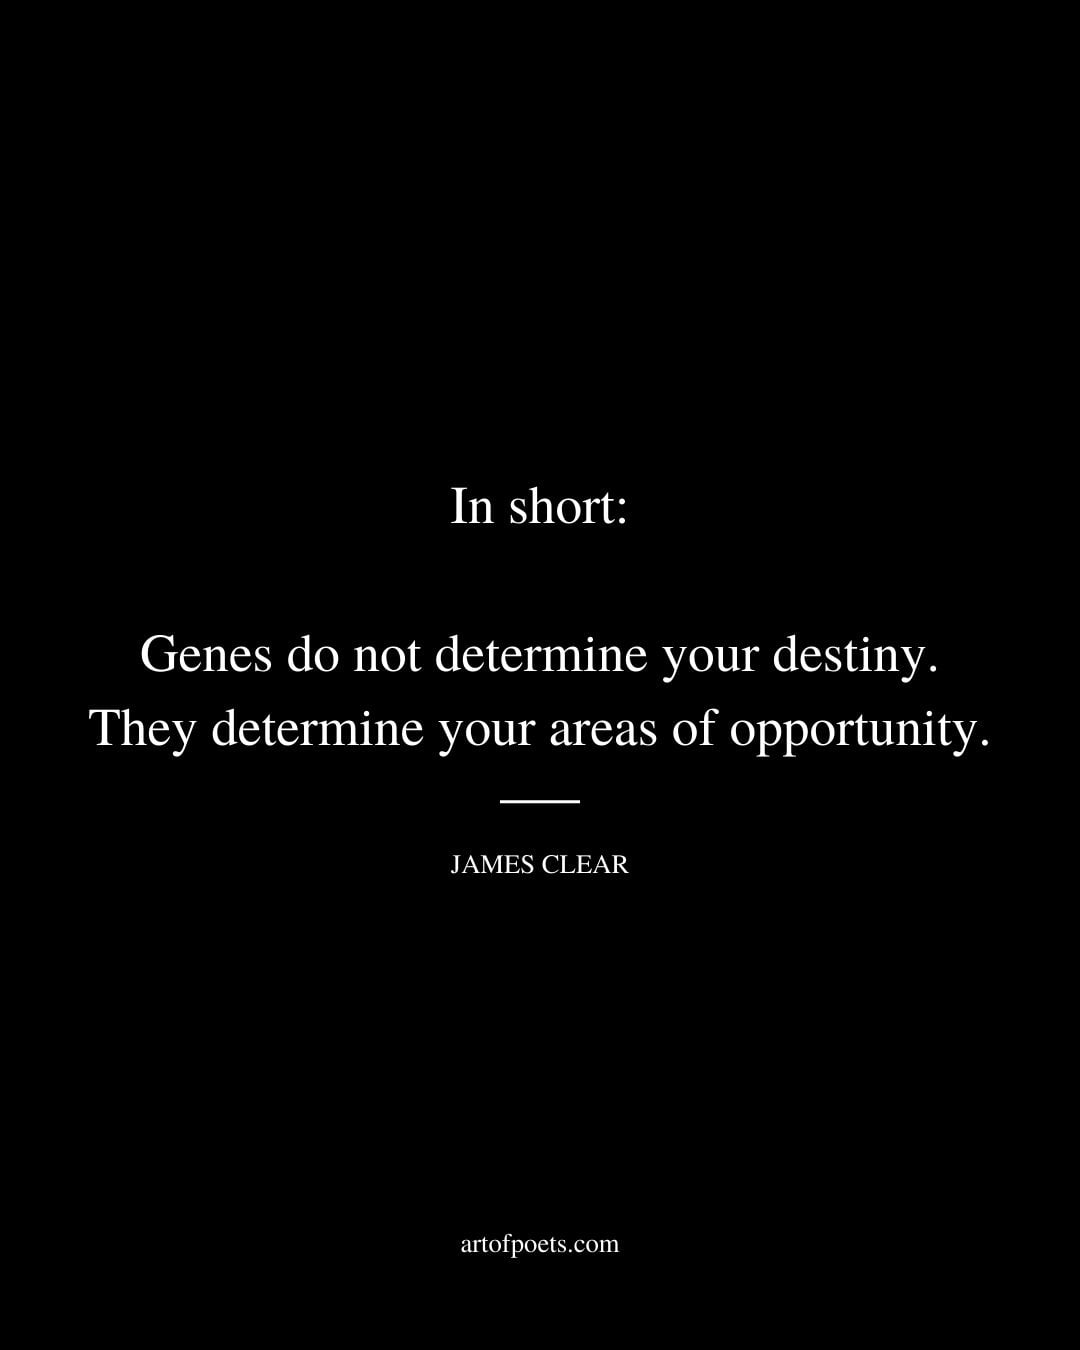 In short genes do not determine your destiny. They determine your areas of opportunity